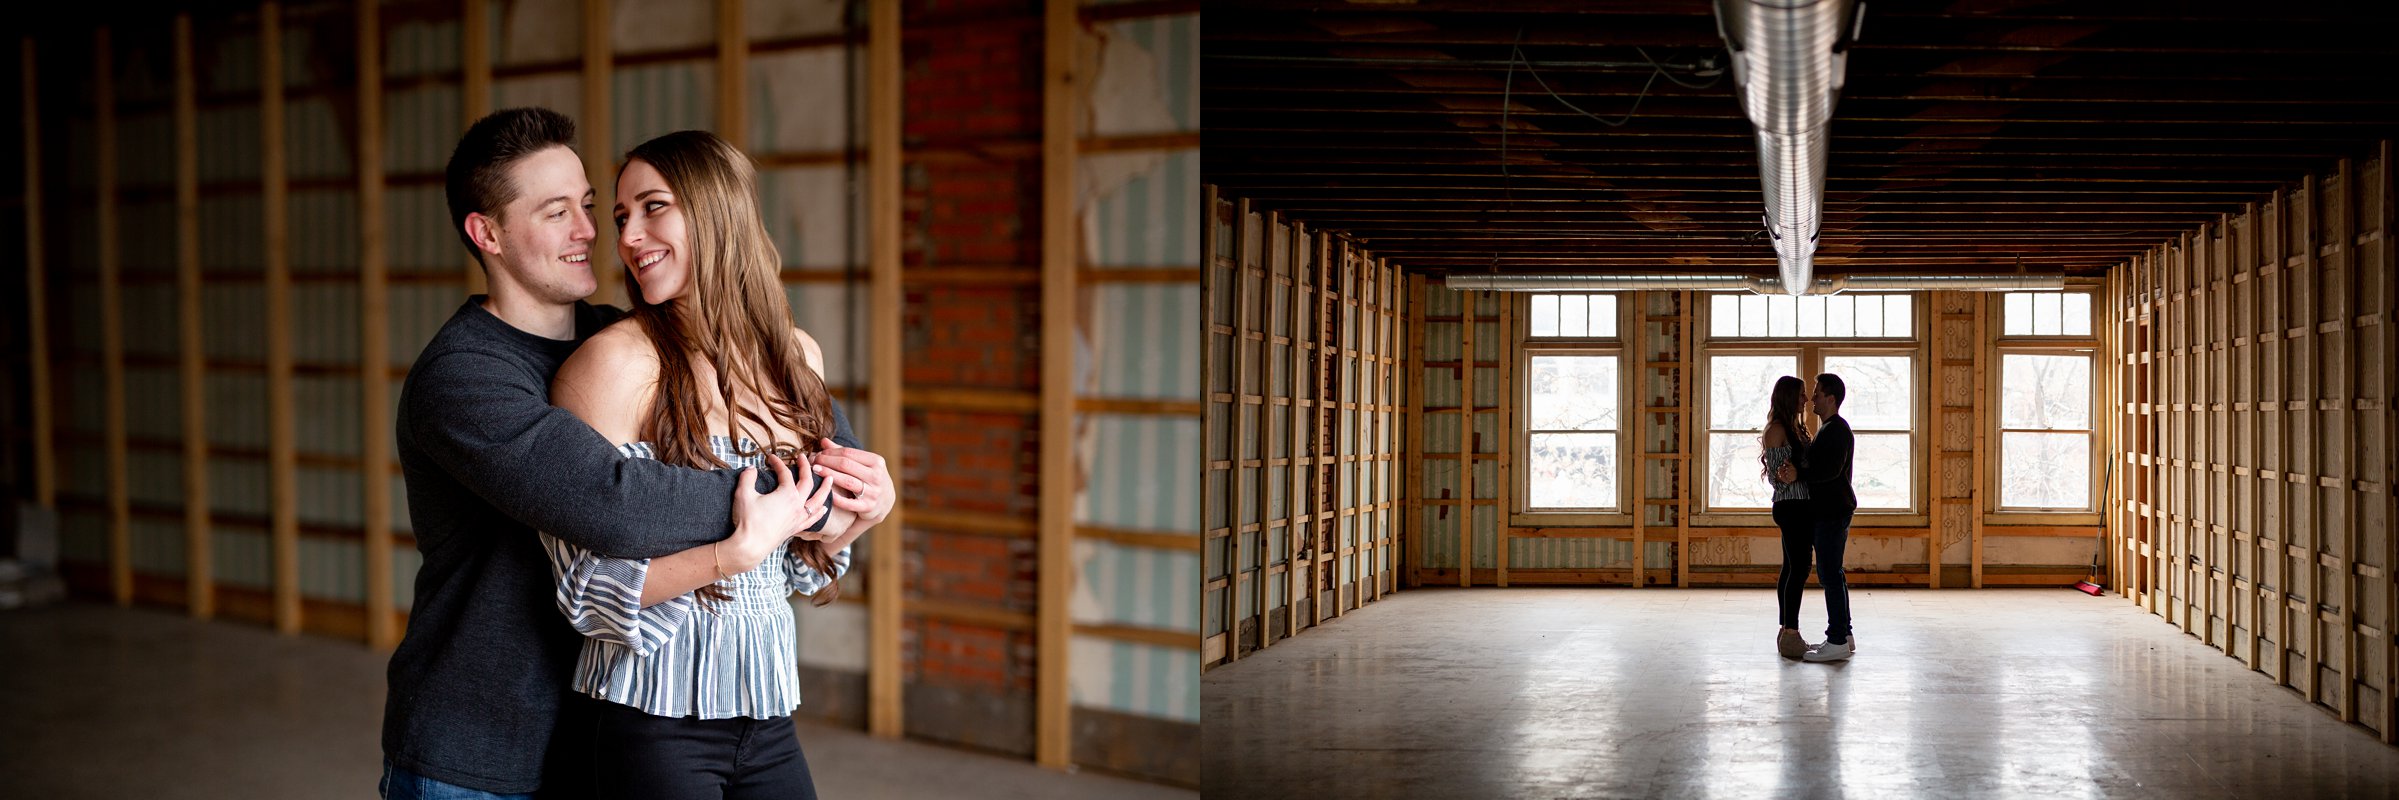 engaged coulpe alone in empty rustic room with exposed brick for their fort collins engagement session